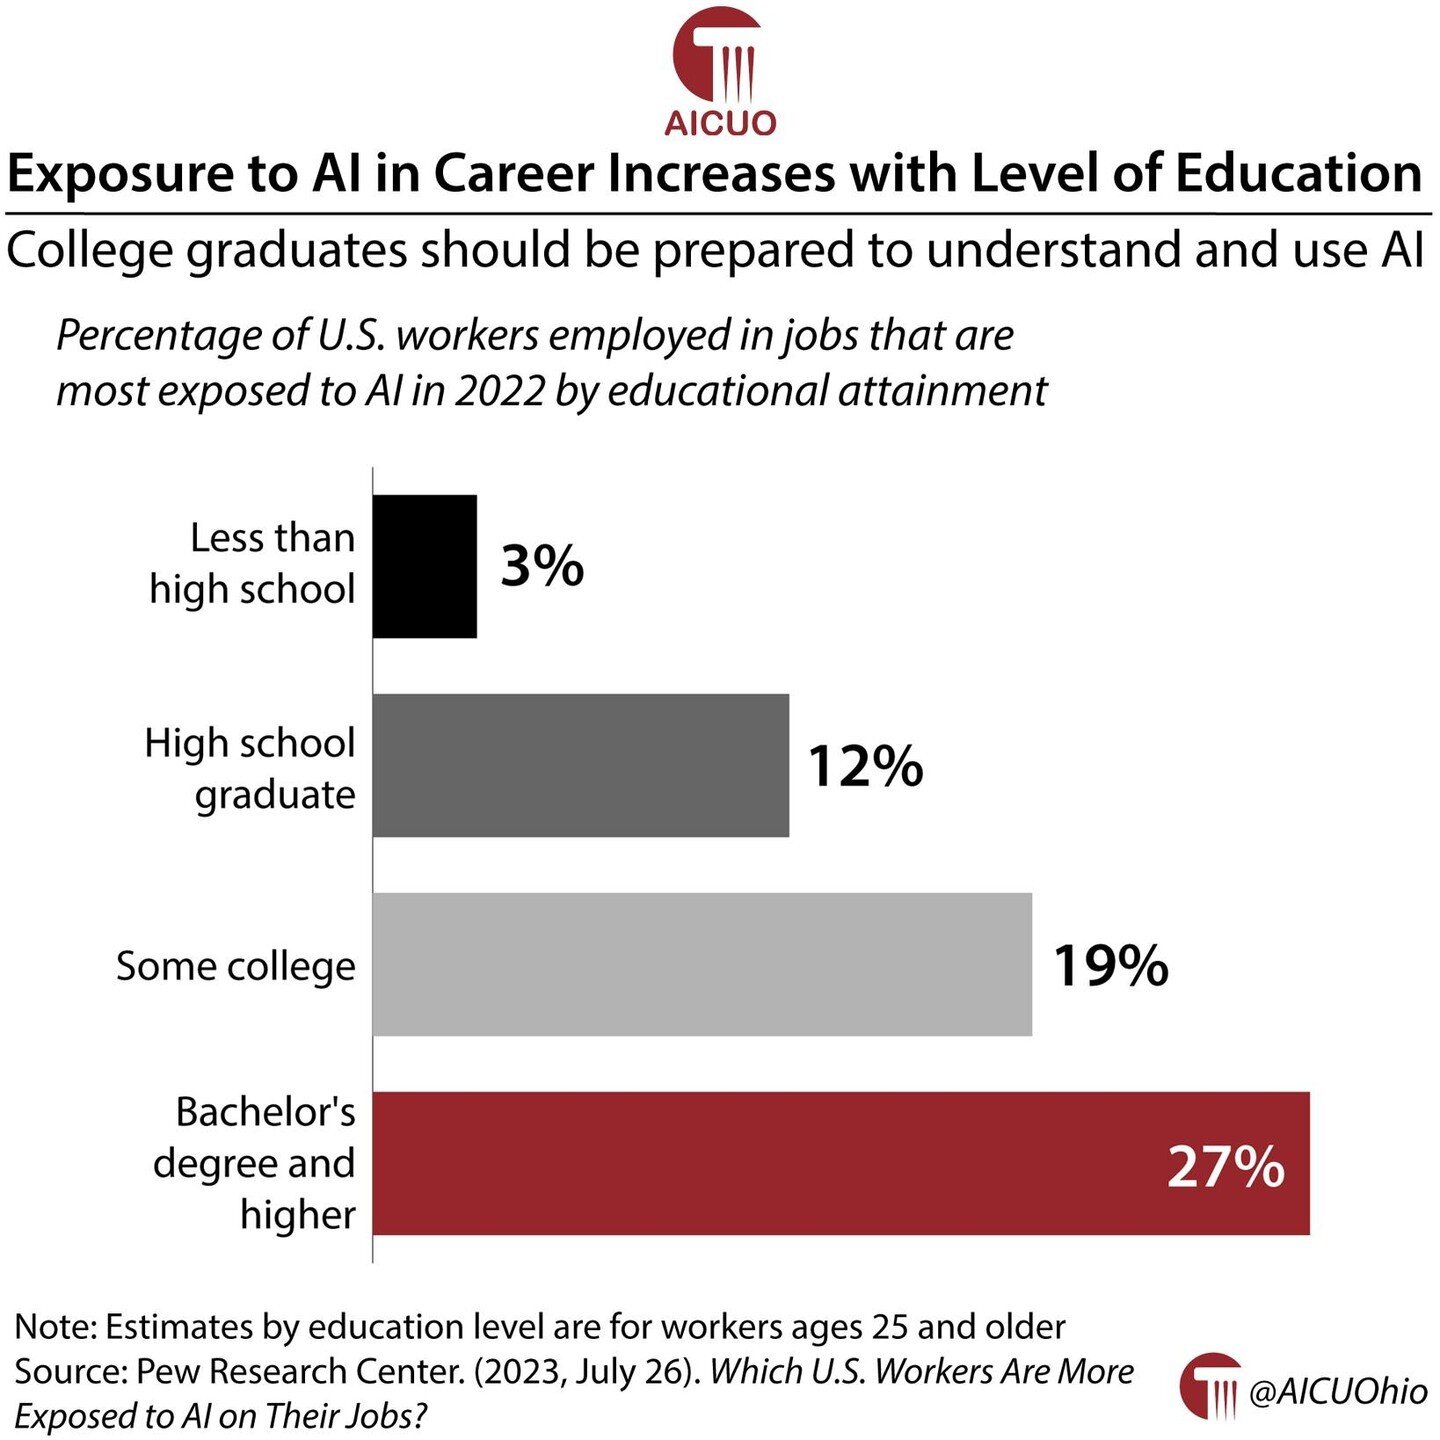 Exposure to #AI in career increases with level of education 
.
.
.
.
#GraphoftheWeek #GotW #HigherEd